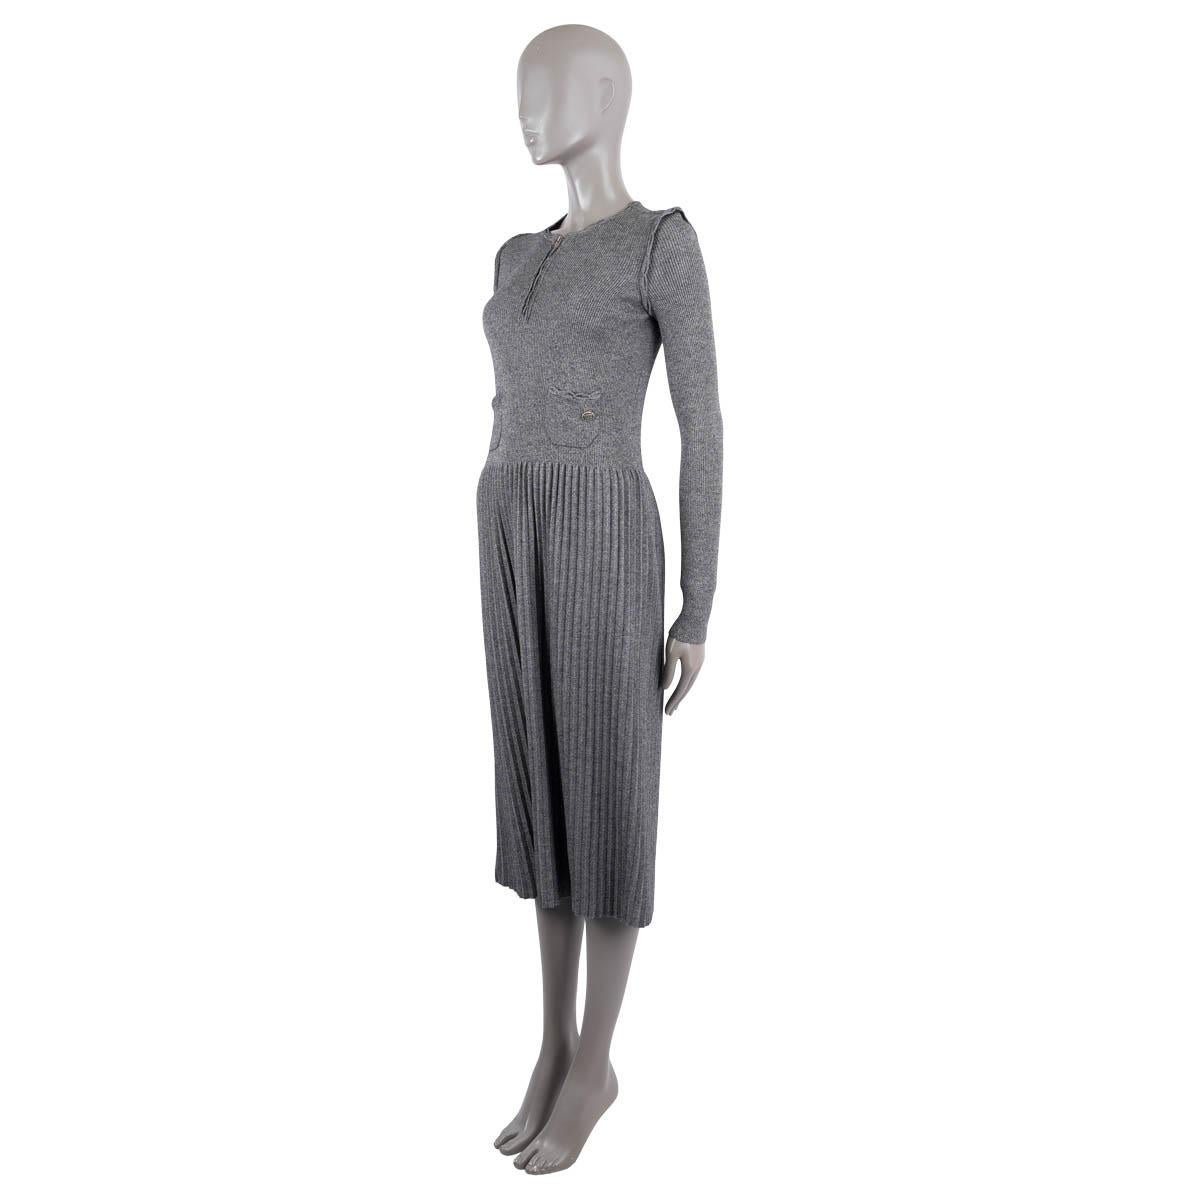 100% authentic Chanel rib-knit midi dress in grey cotton (51%), cashmere (34%) and silk (15%). Featuring a zip neck, two patch pockets on the front with logo button and a pleated skirt. Unlined. Has been worn and is in excellent condition.

2016